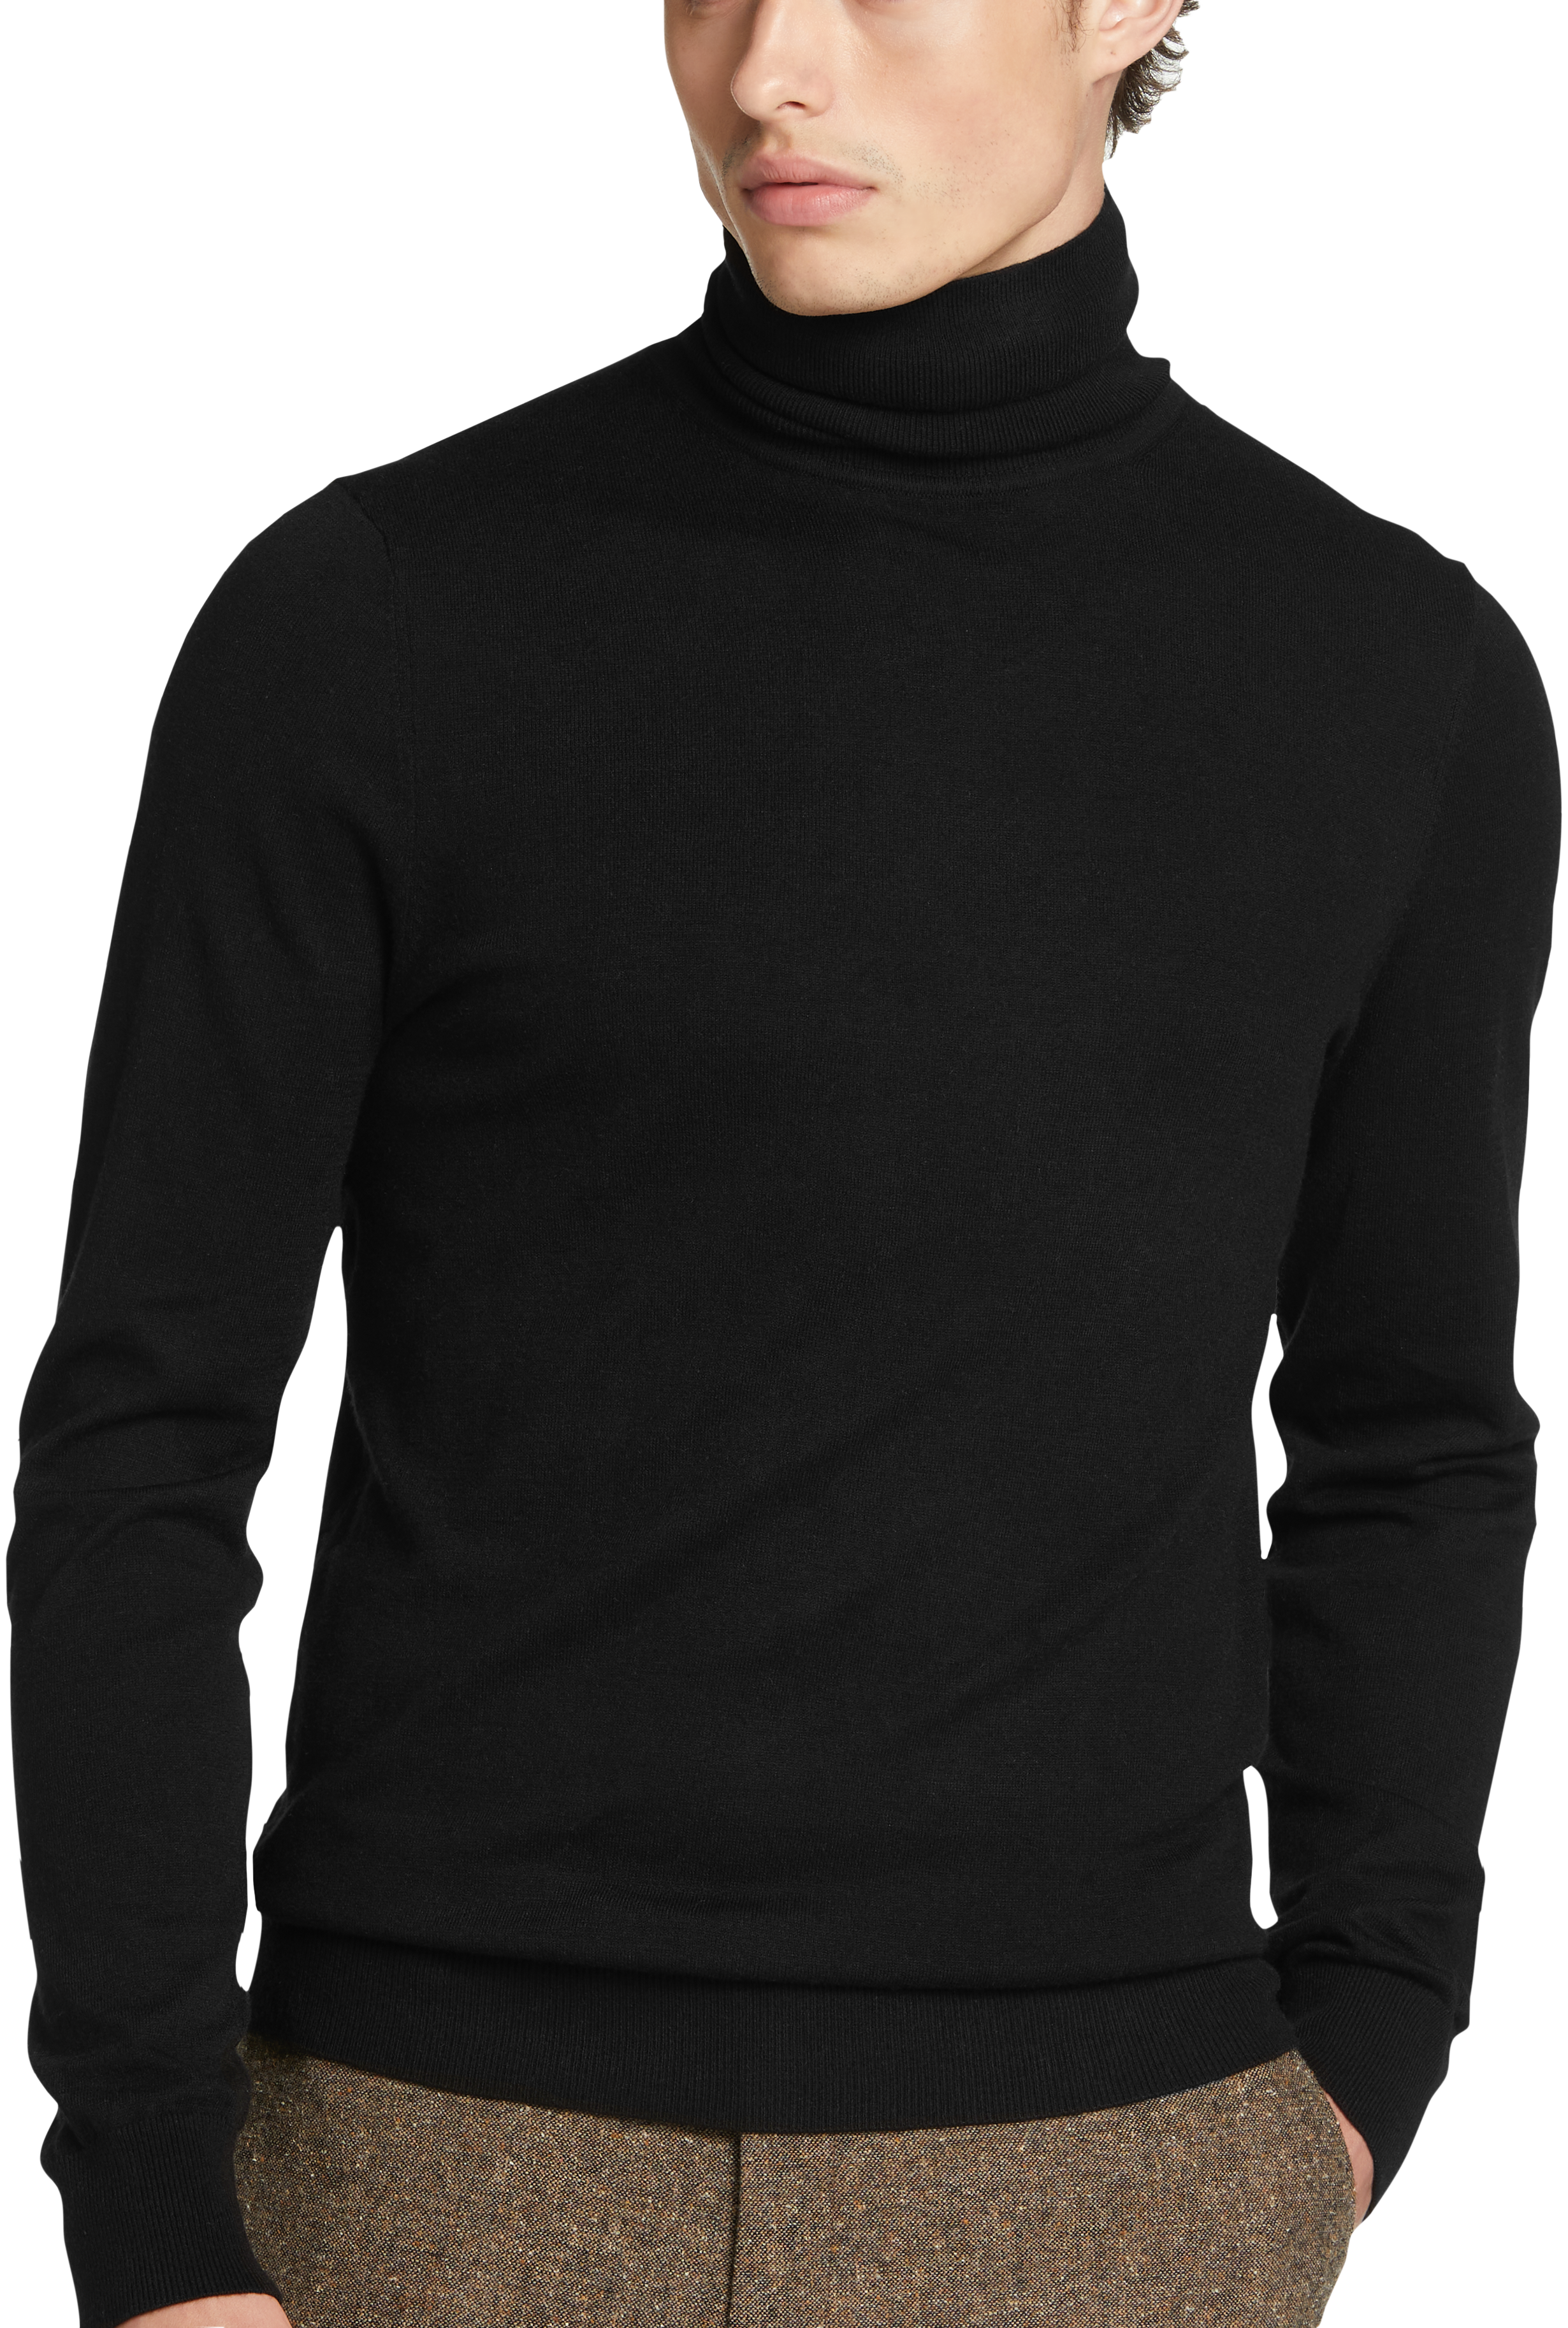 Paisley & Gray Slim Fit Lightweight Turtleneck Sweater | Men's Sweaters |  Moores Clothing